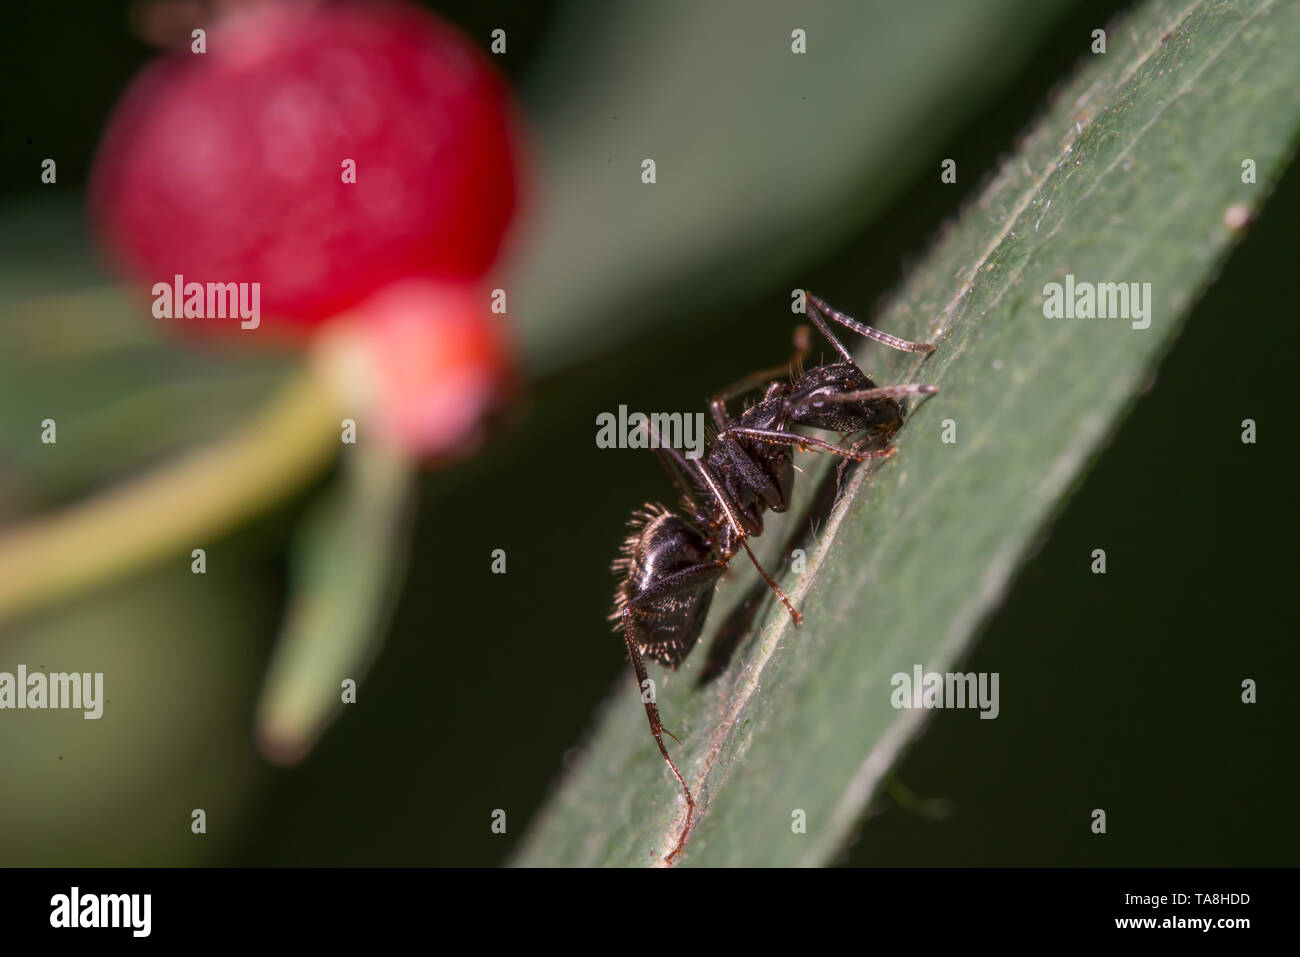 Extreme closeup detailed image ant climbing on leaf with red berry in background - great macro detail of ant Stock Photo